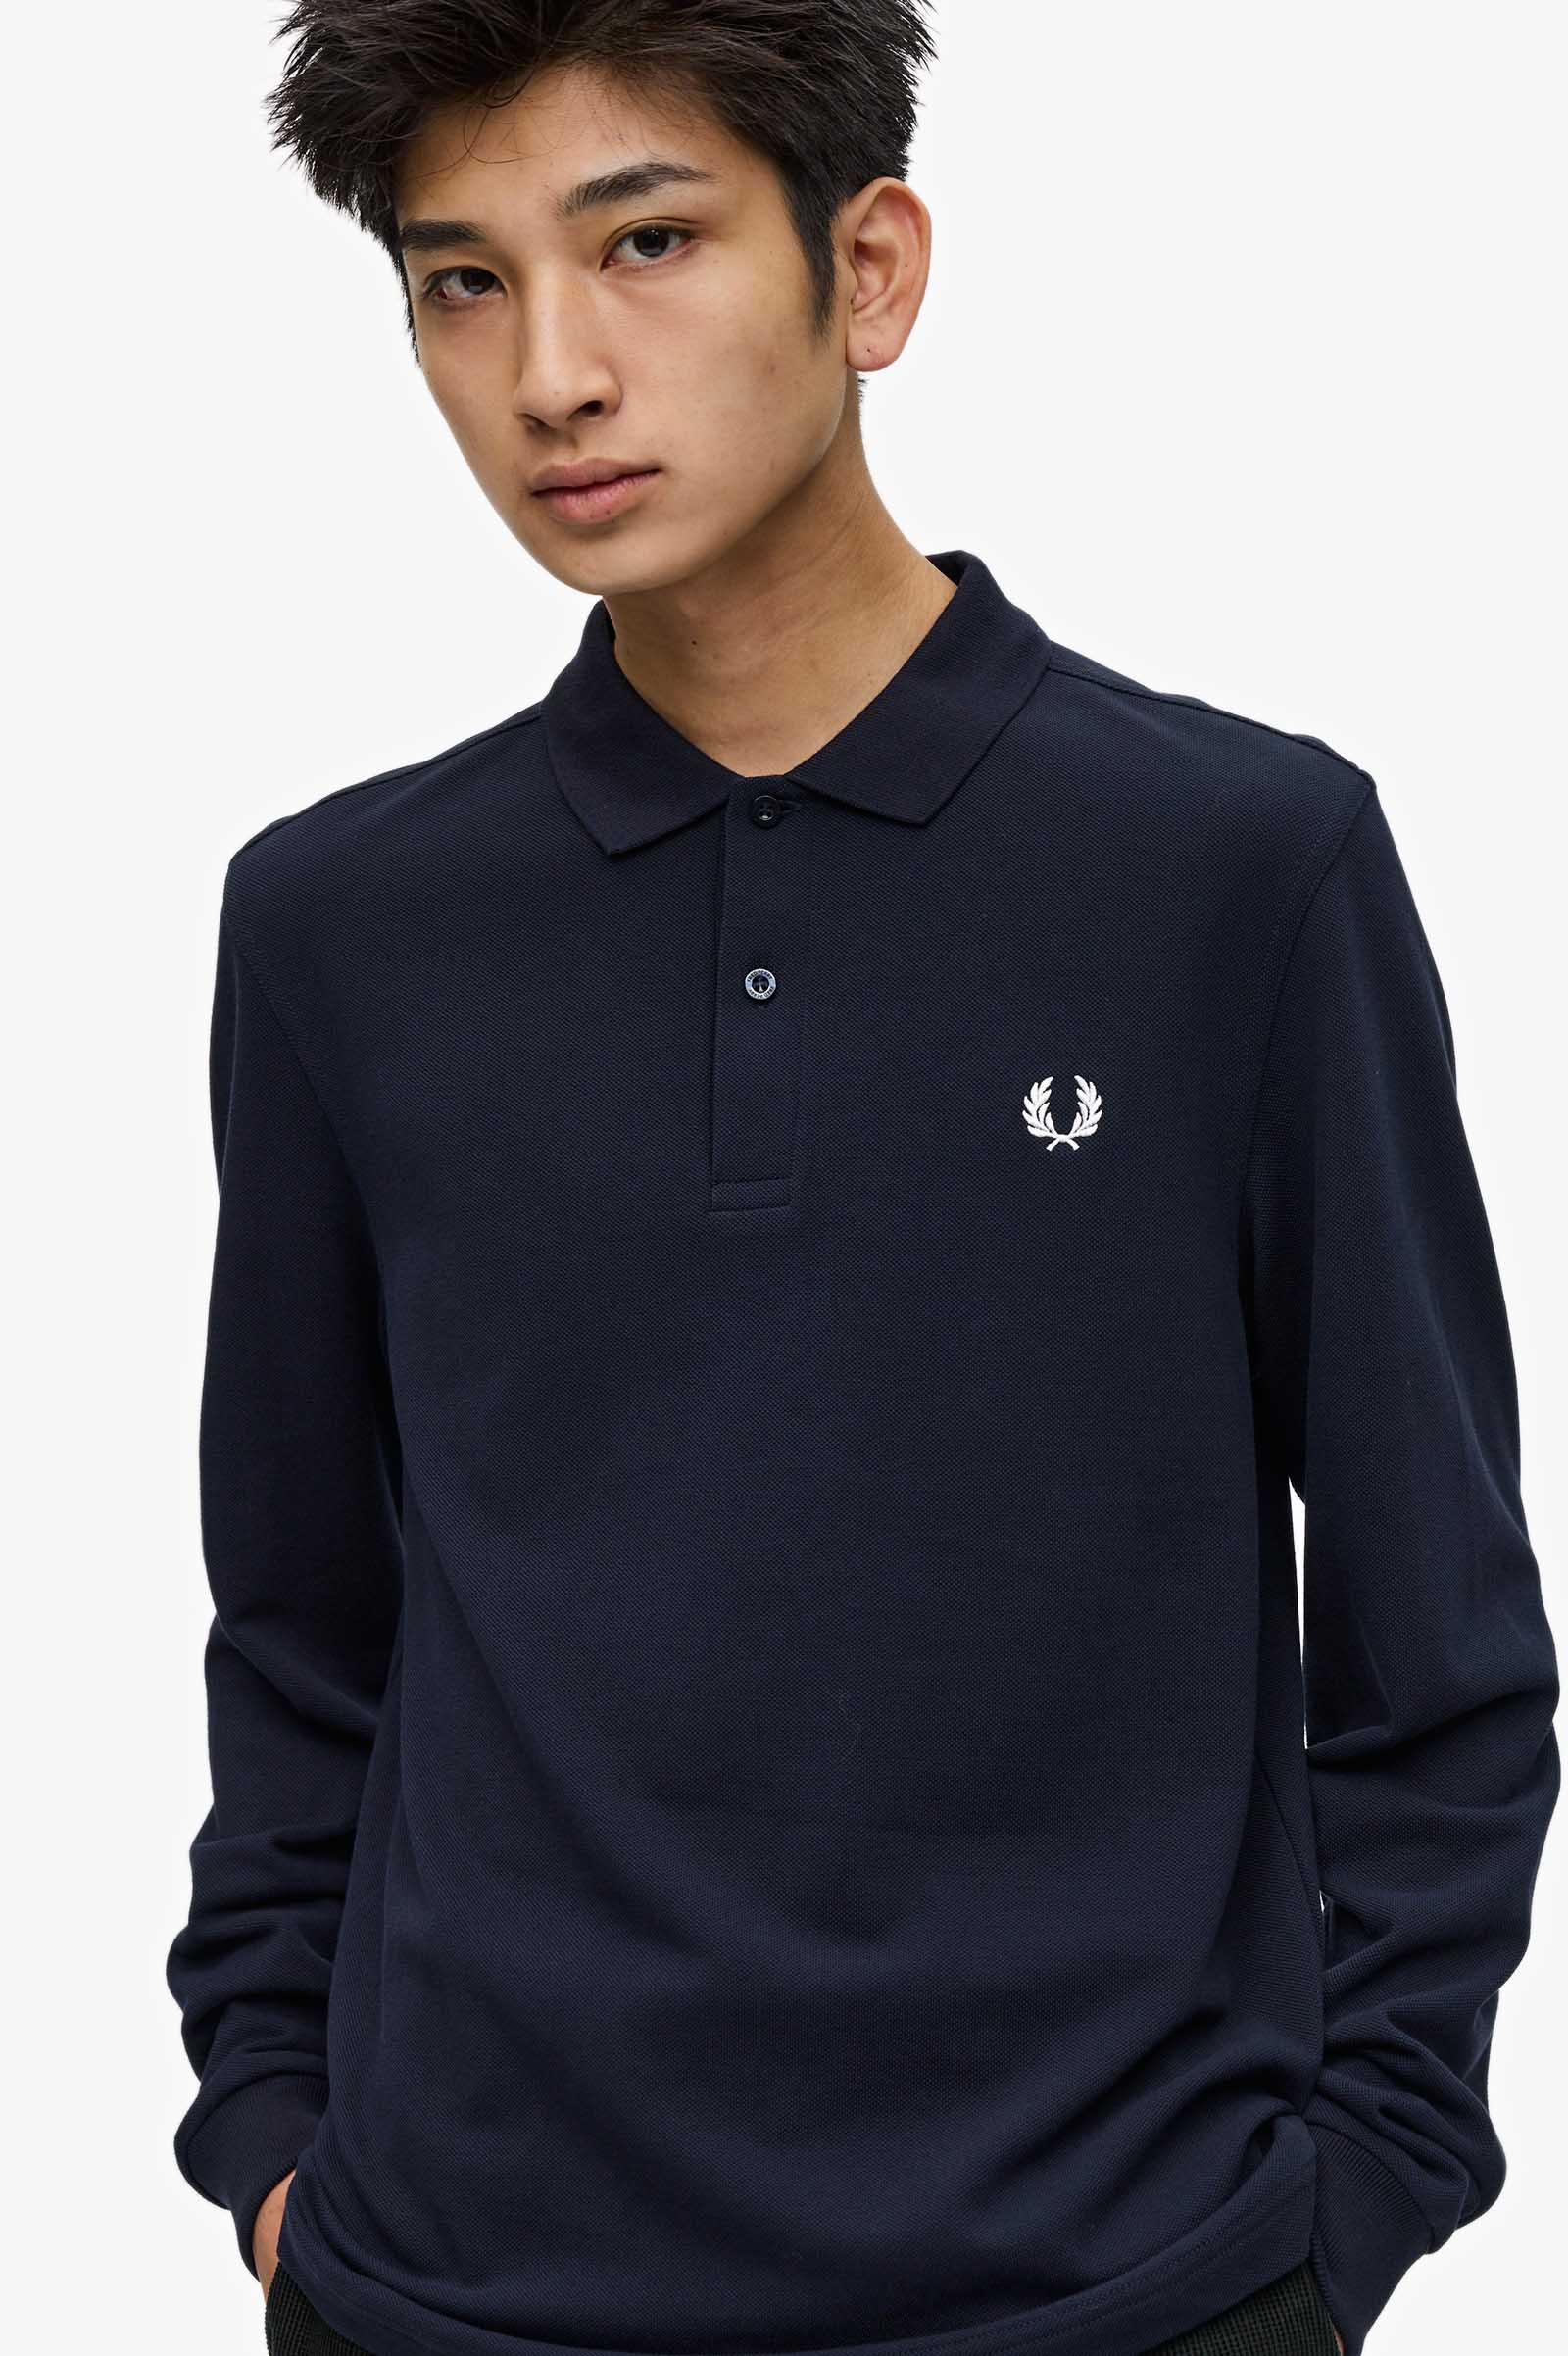 The Fred Perry Shirt - M6006|FRED PERRY(フレッドペリー)の通販 